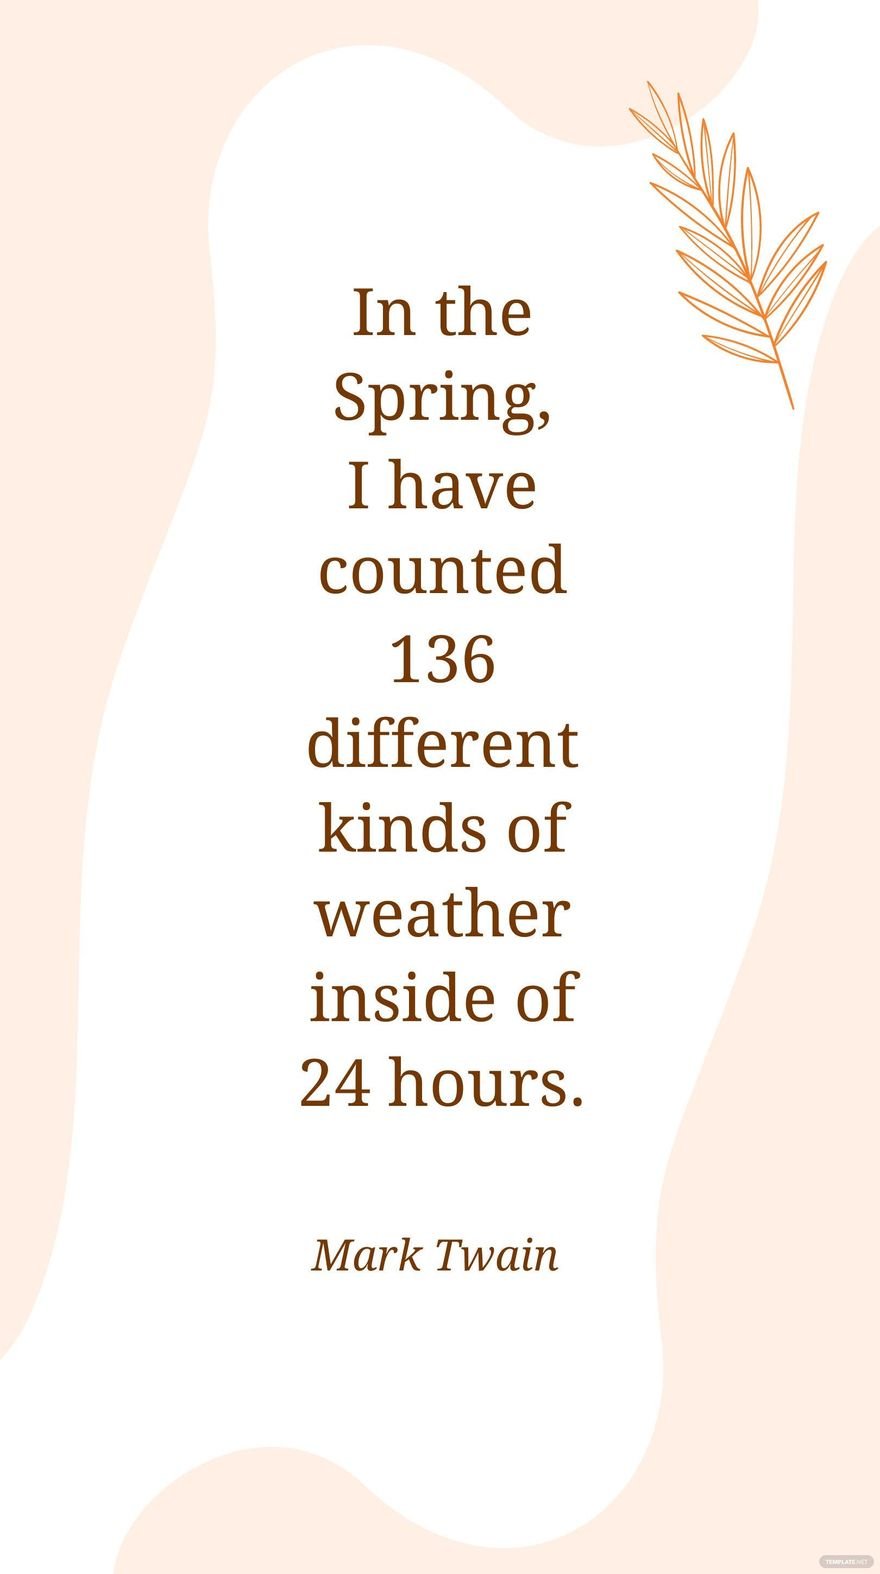 Free Mark Twain - In the Spring, I have counted 136 different kinds of weather inside of 24 hours. in JPG